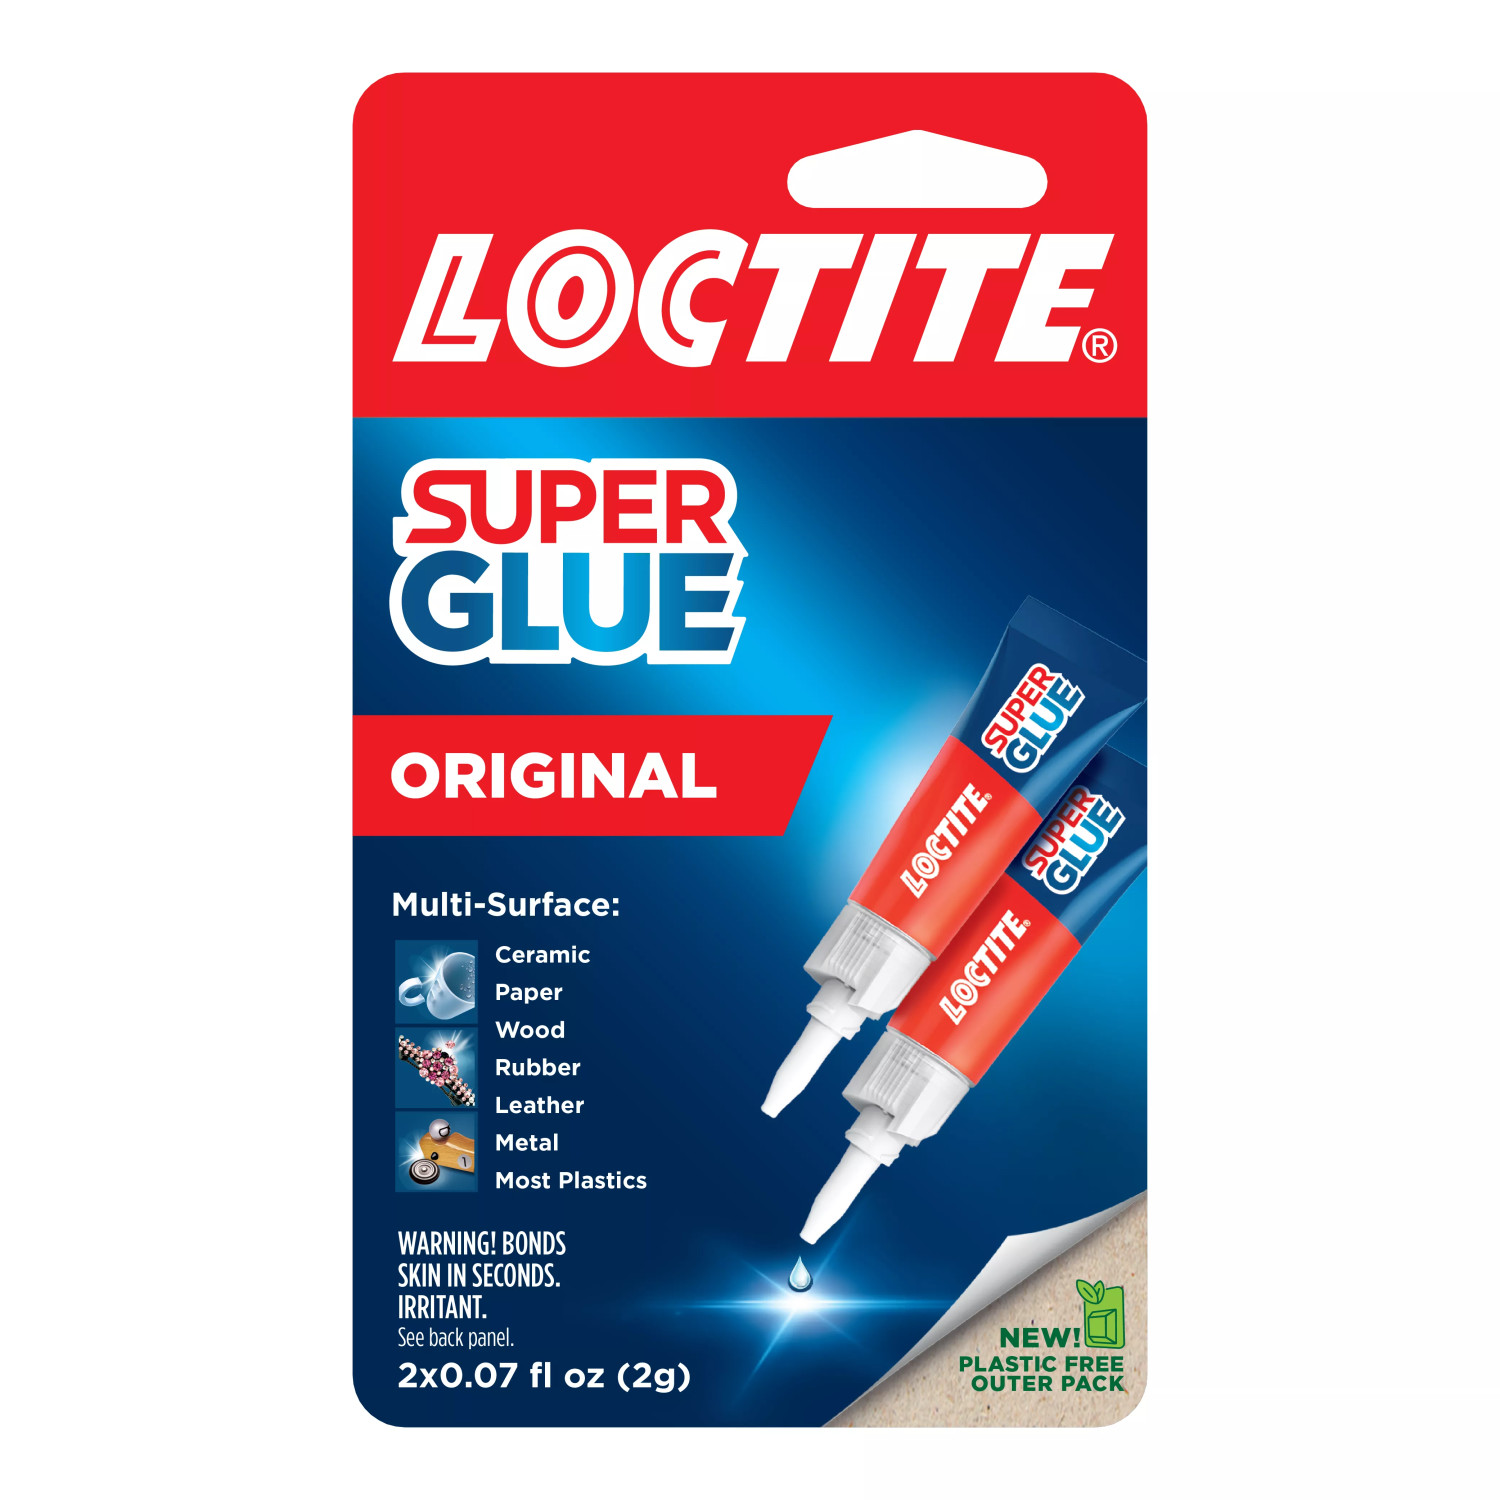 Loctite Super Glue Liquid Tube, 1 Pack of 2 Tubes, Clear 2 g Tubes - image 1 of 13